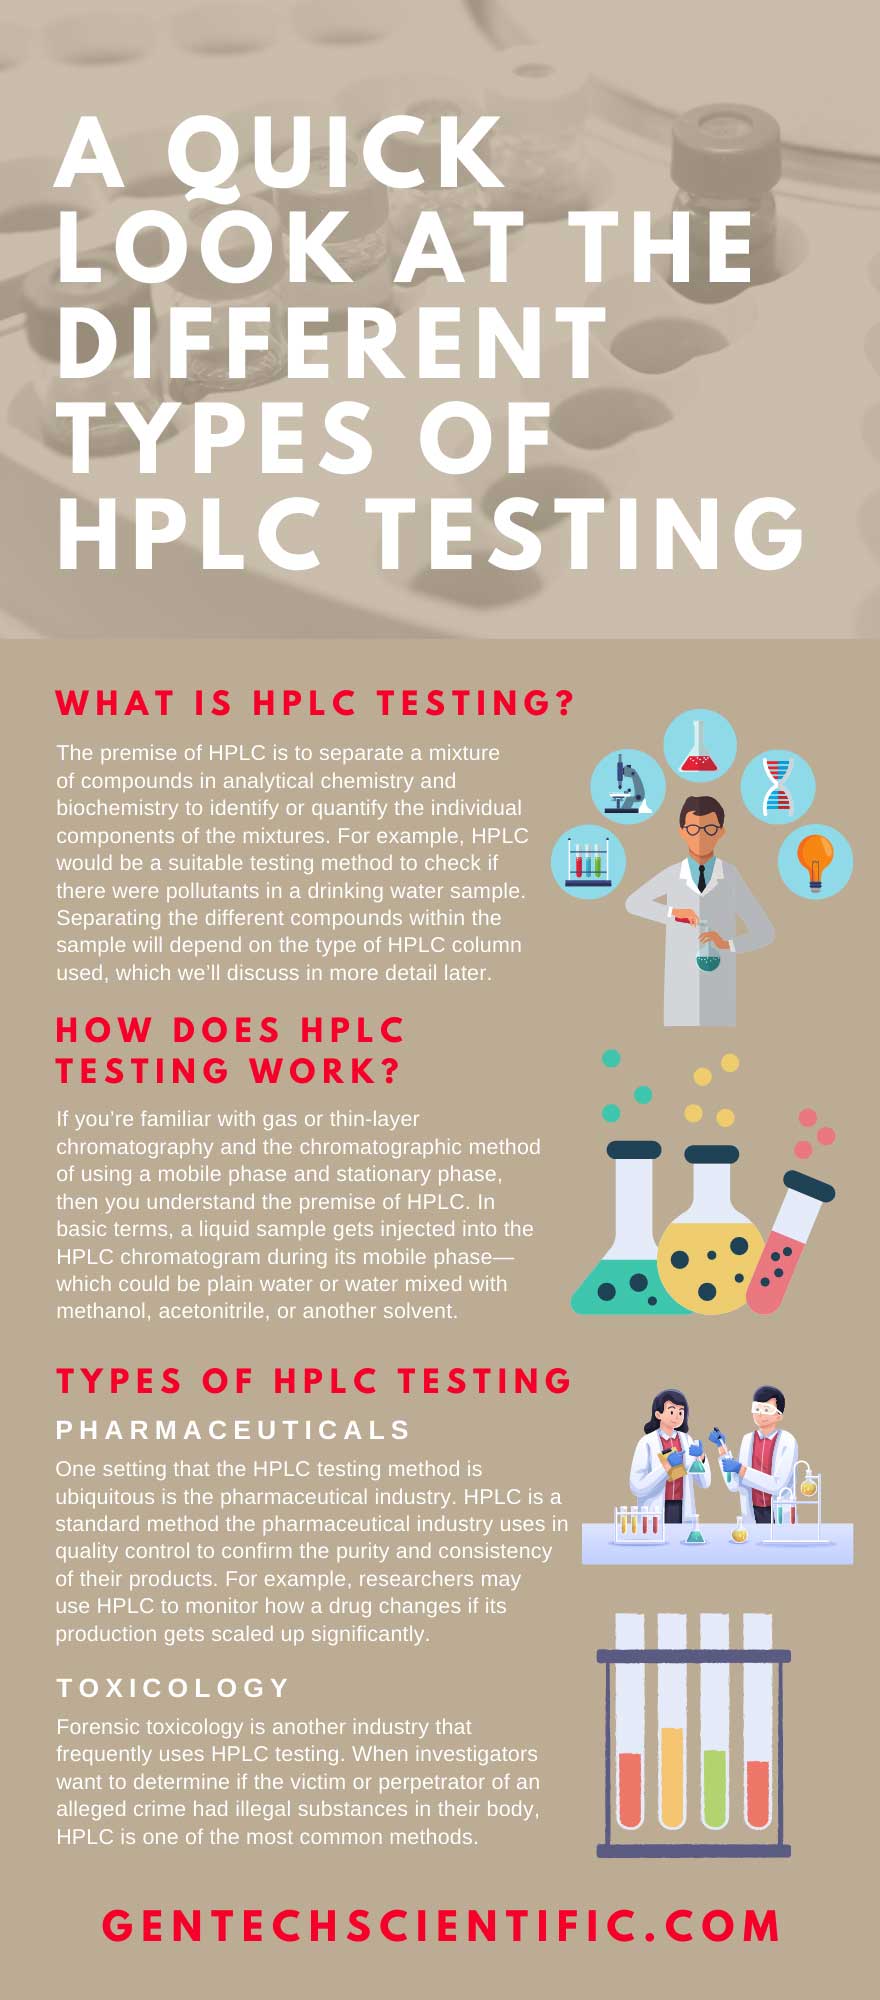 A Quick Look at the Different Types of HPLC Testing